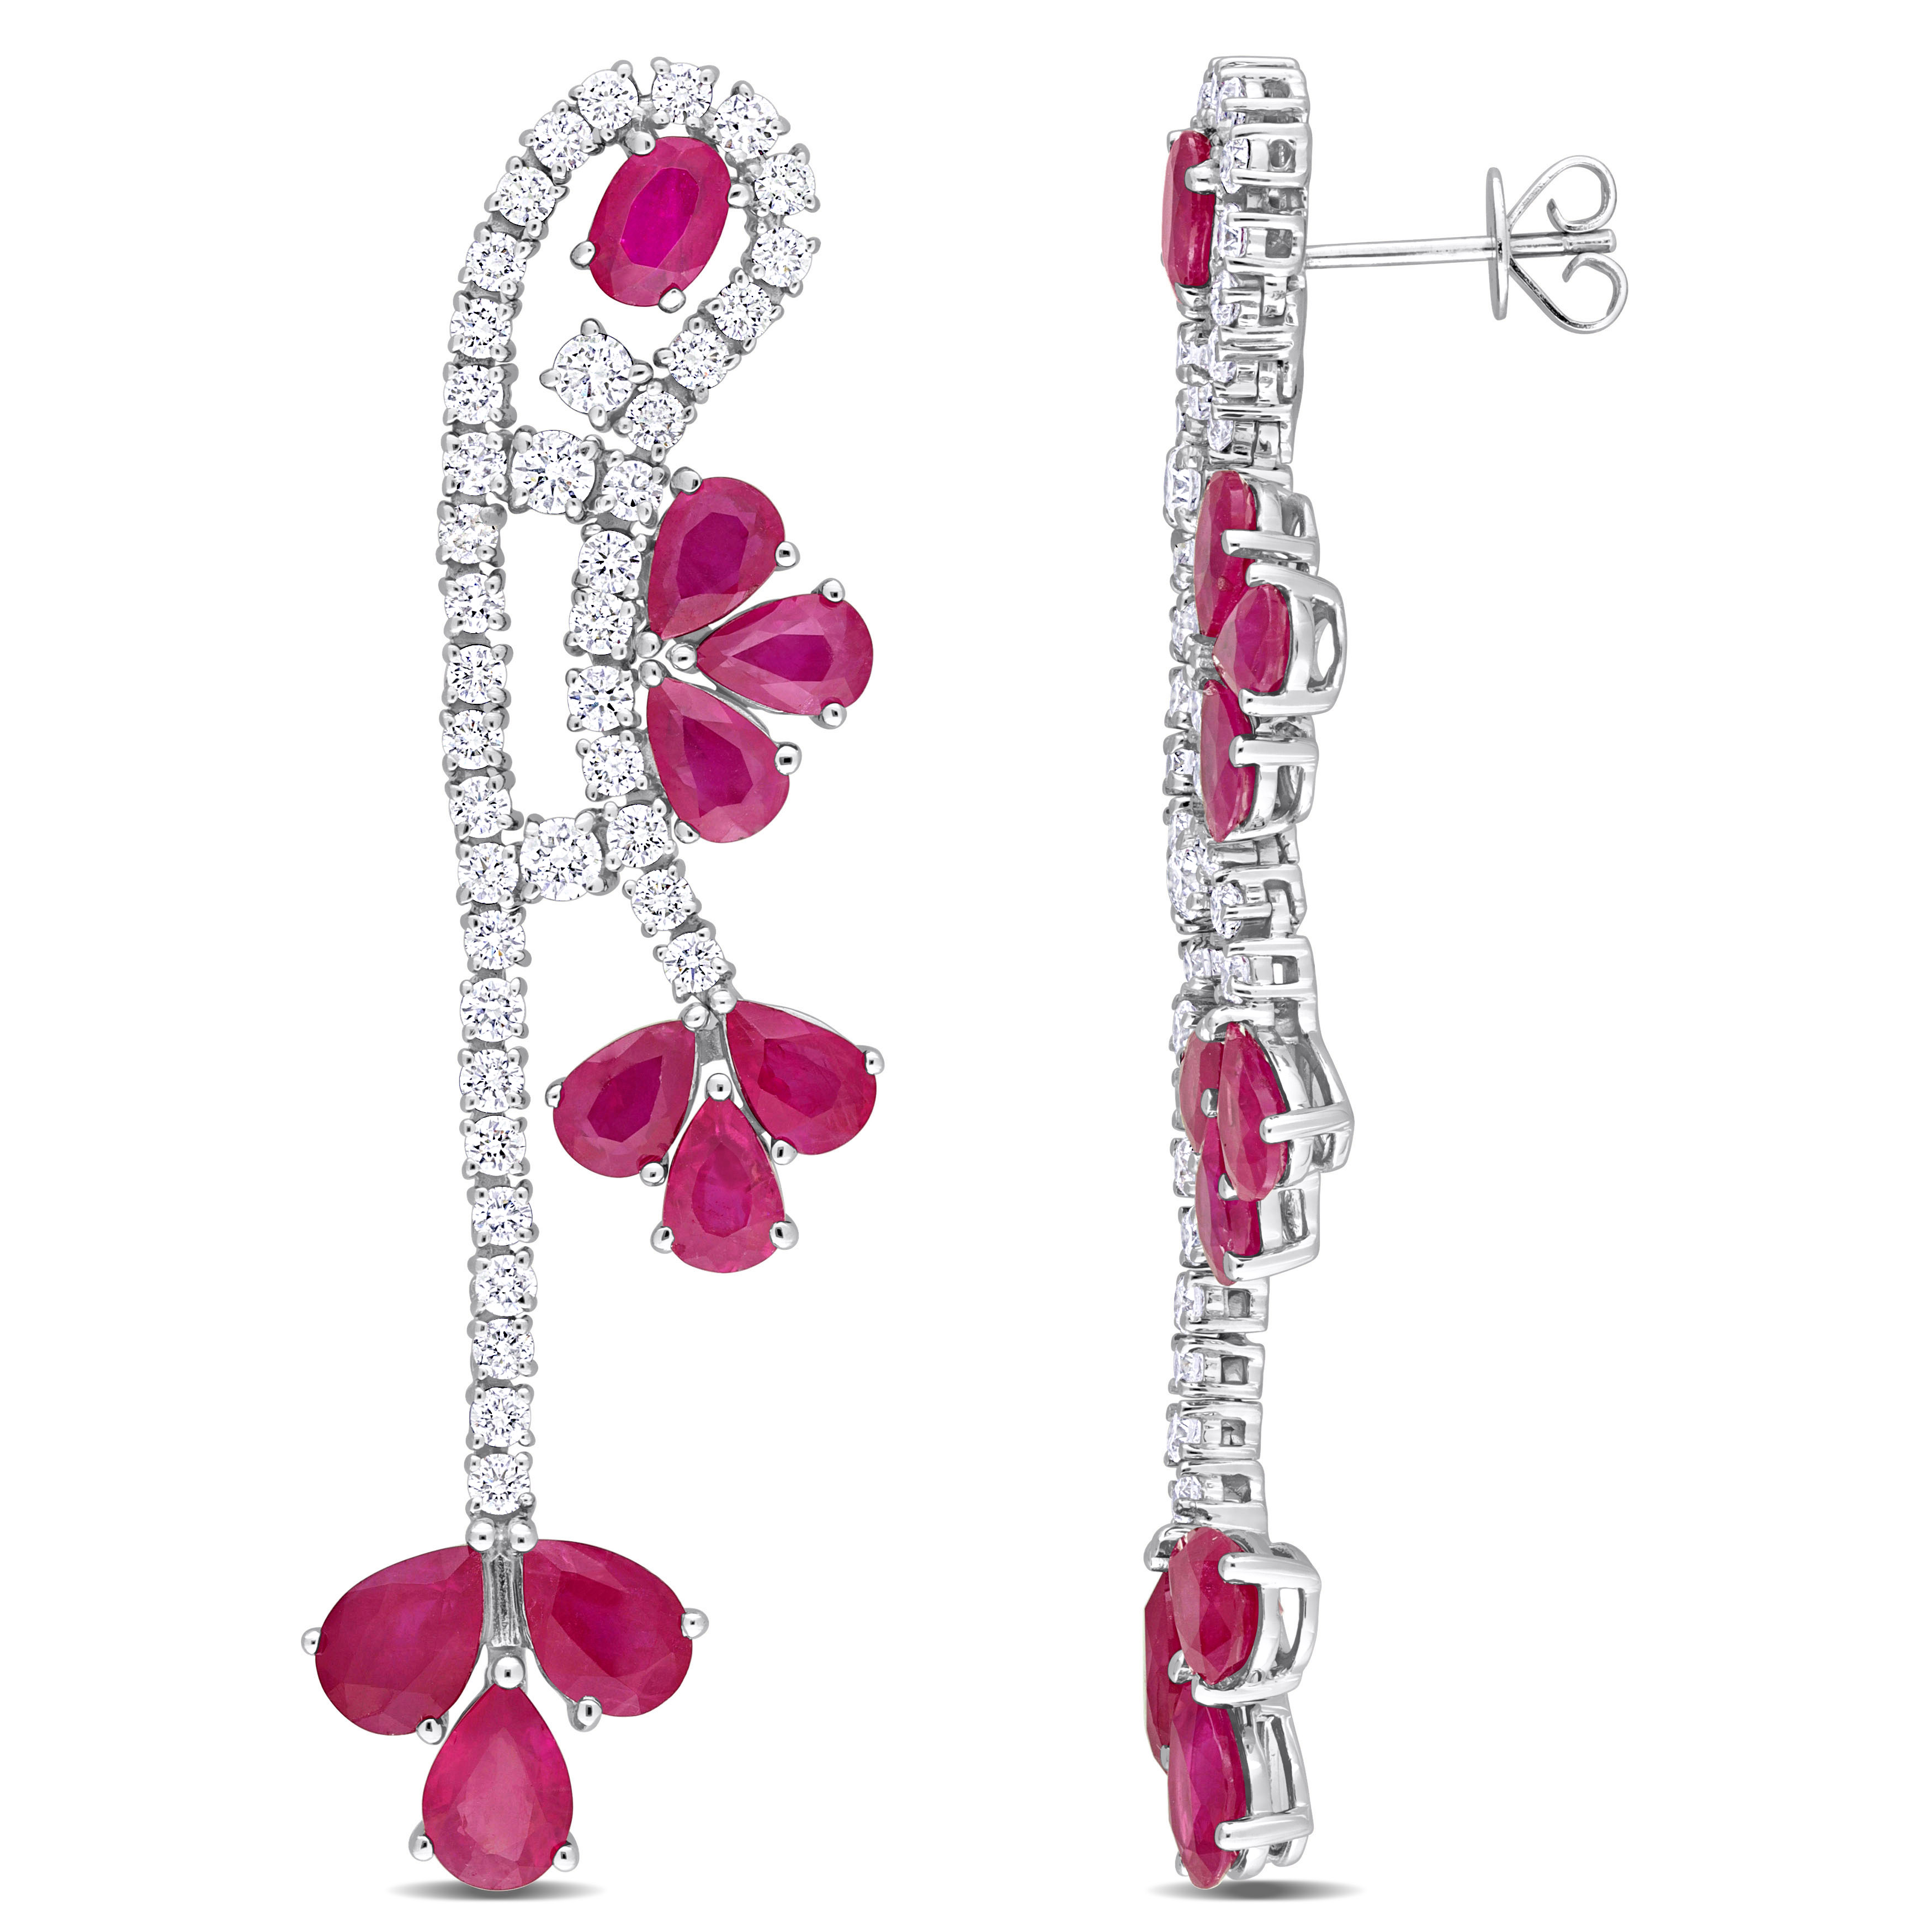 11 1/5ct TGW Pear-Shape and Oval Ruby and 2 5/8ct TDW Round-Cut Diamond Drop Earrings in 14k White Gold